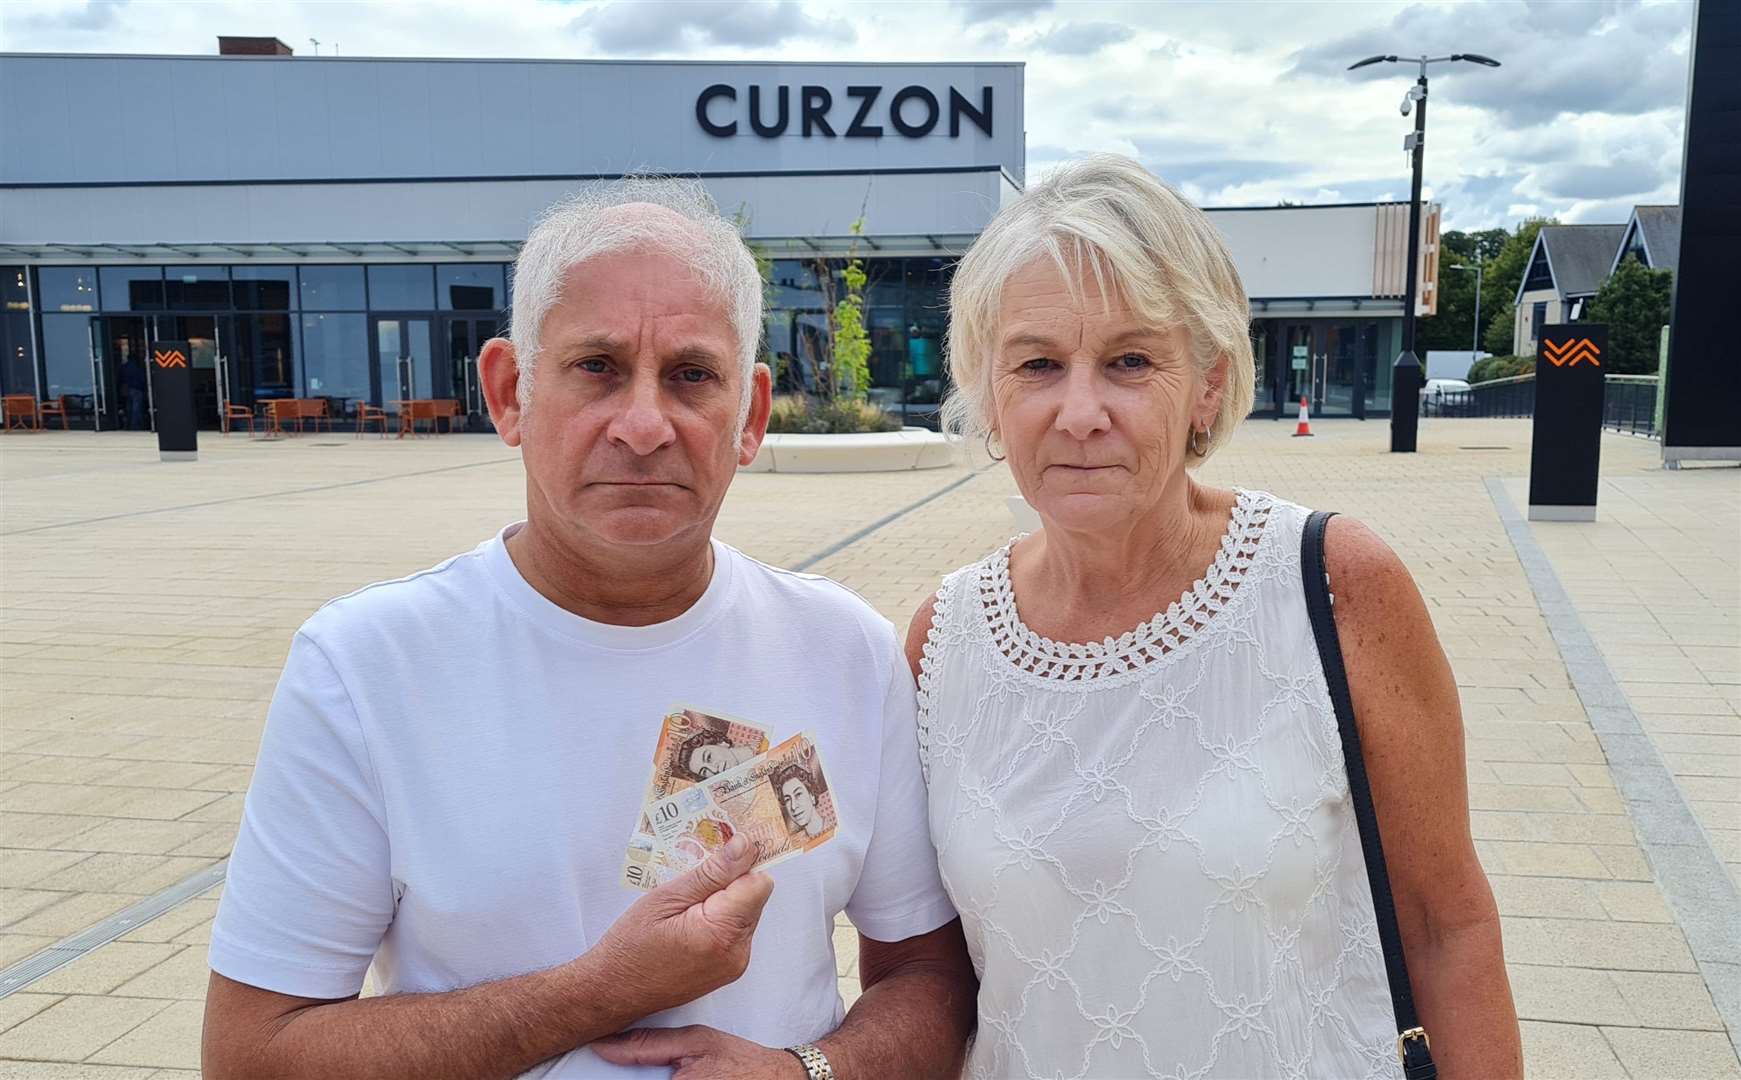 Richard and Carol Riley previously criticised the cinema after being told they couldn't pay with cash